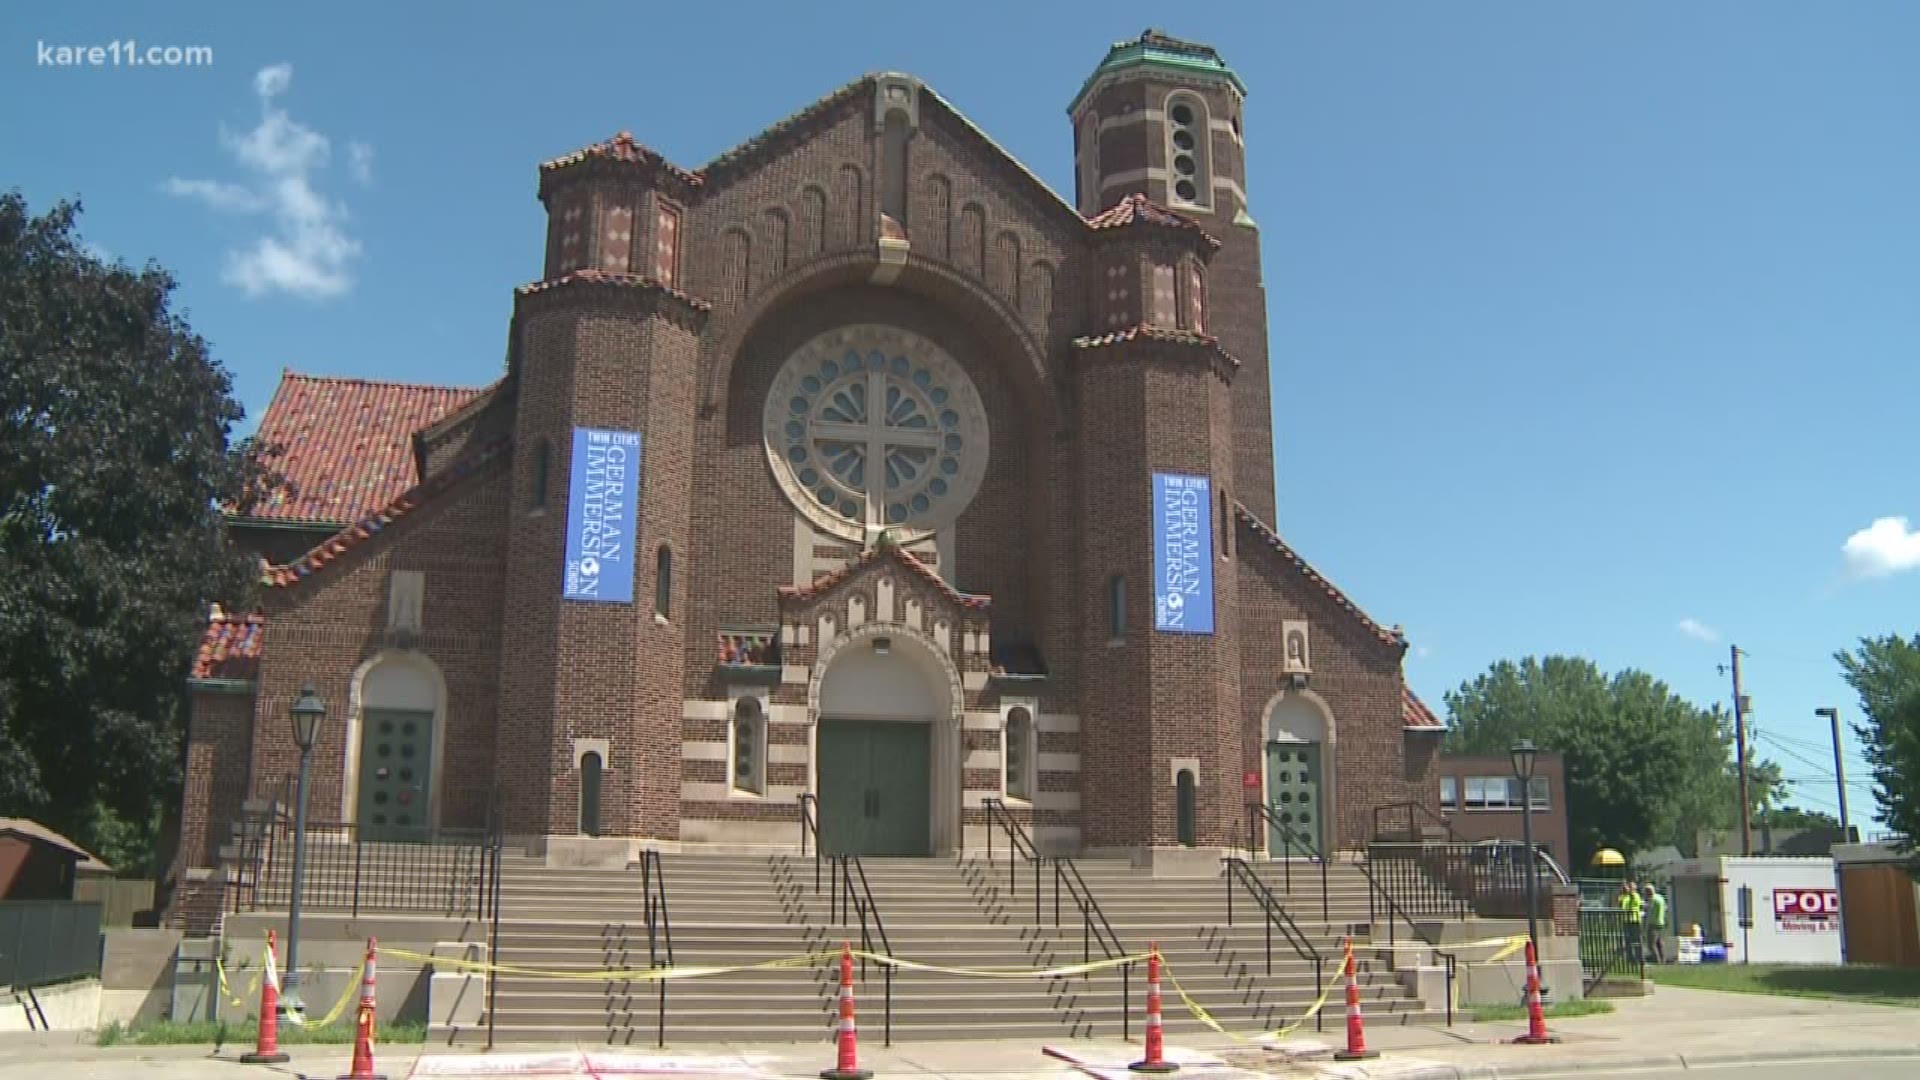 The Minnesota Court of Appeals denied a waiver of bond request by a group of preservationists hoping to stop the demolition of historic St. Andrew's Church in St. Paul. https://kare11.tv/2OdbeU9